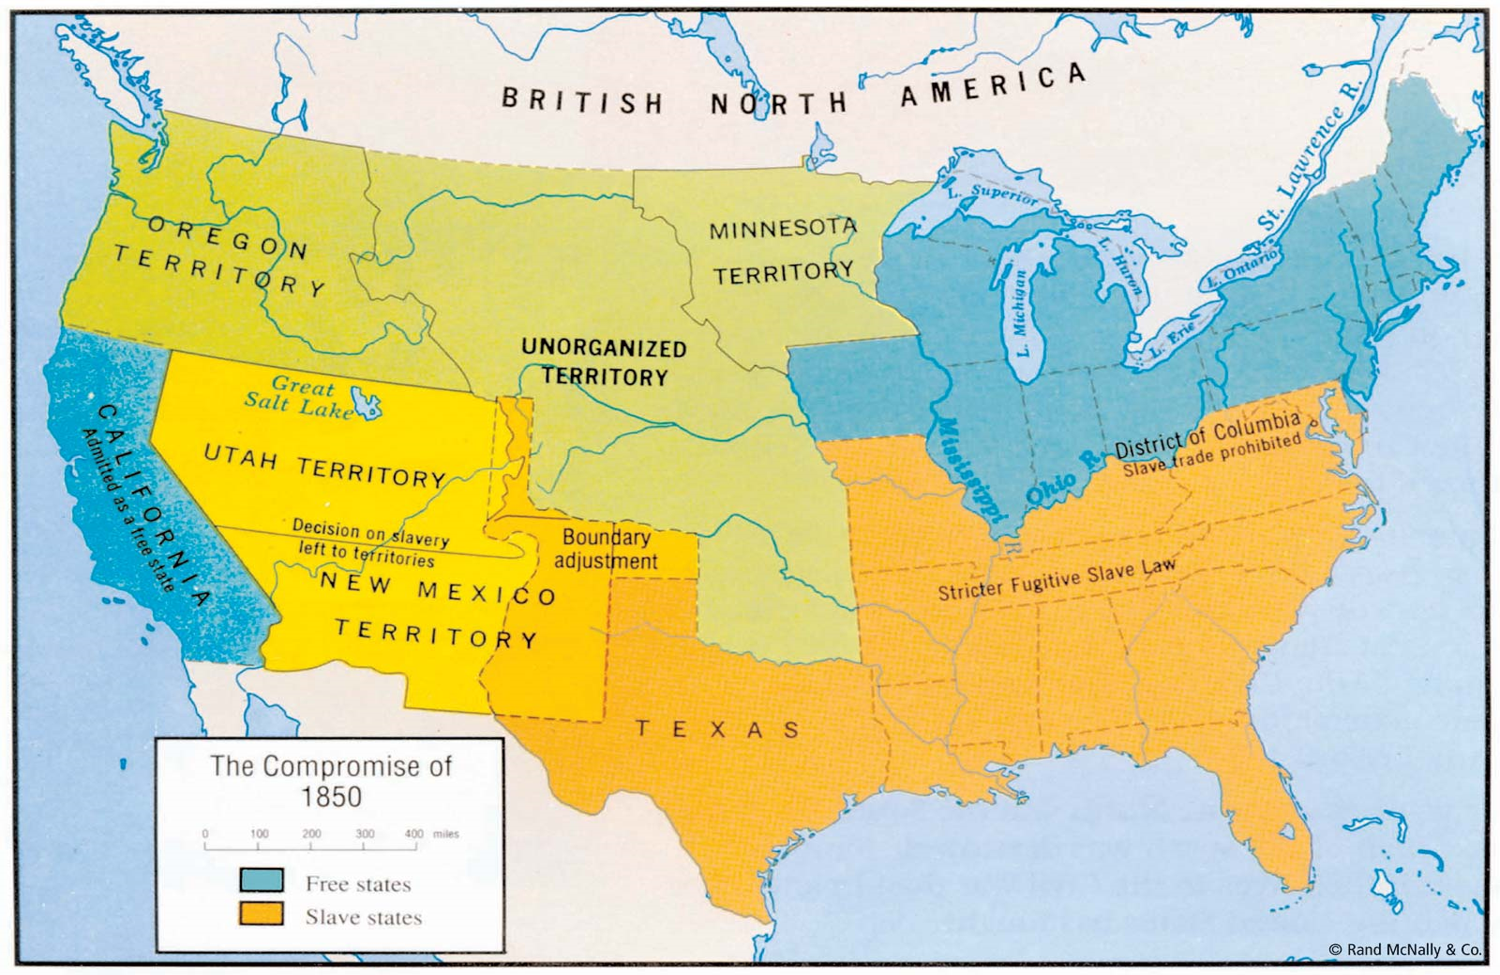 the Compromise of 1850